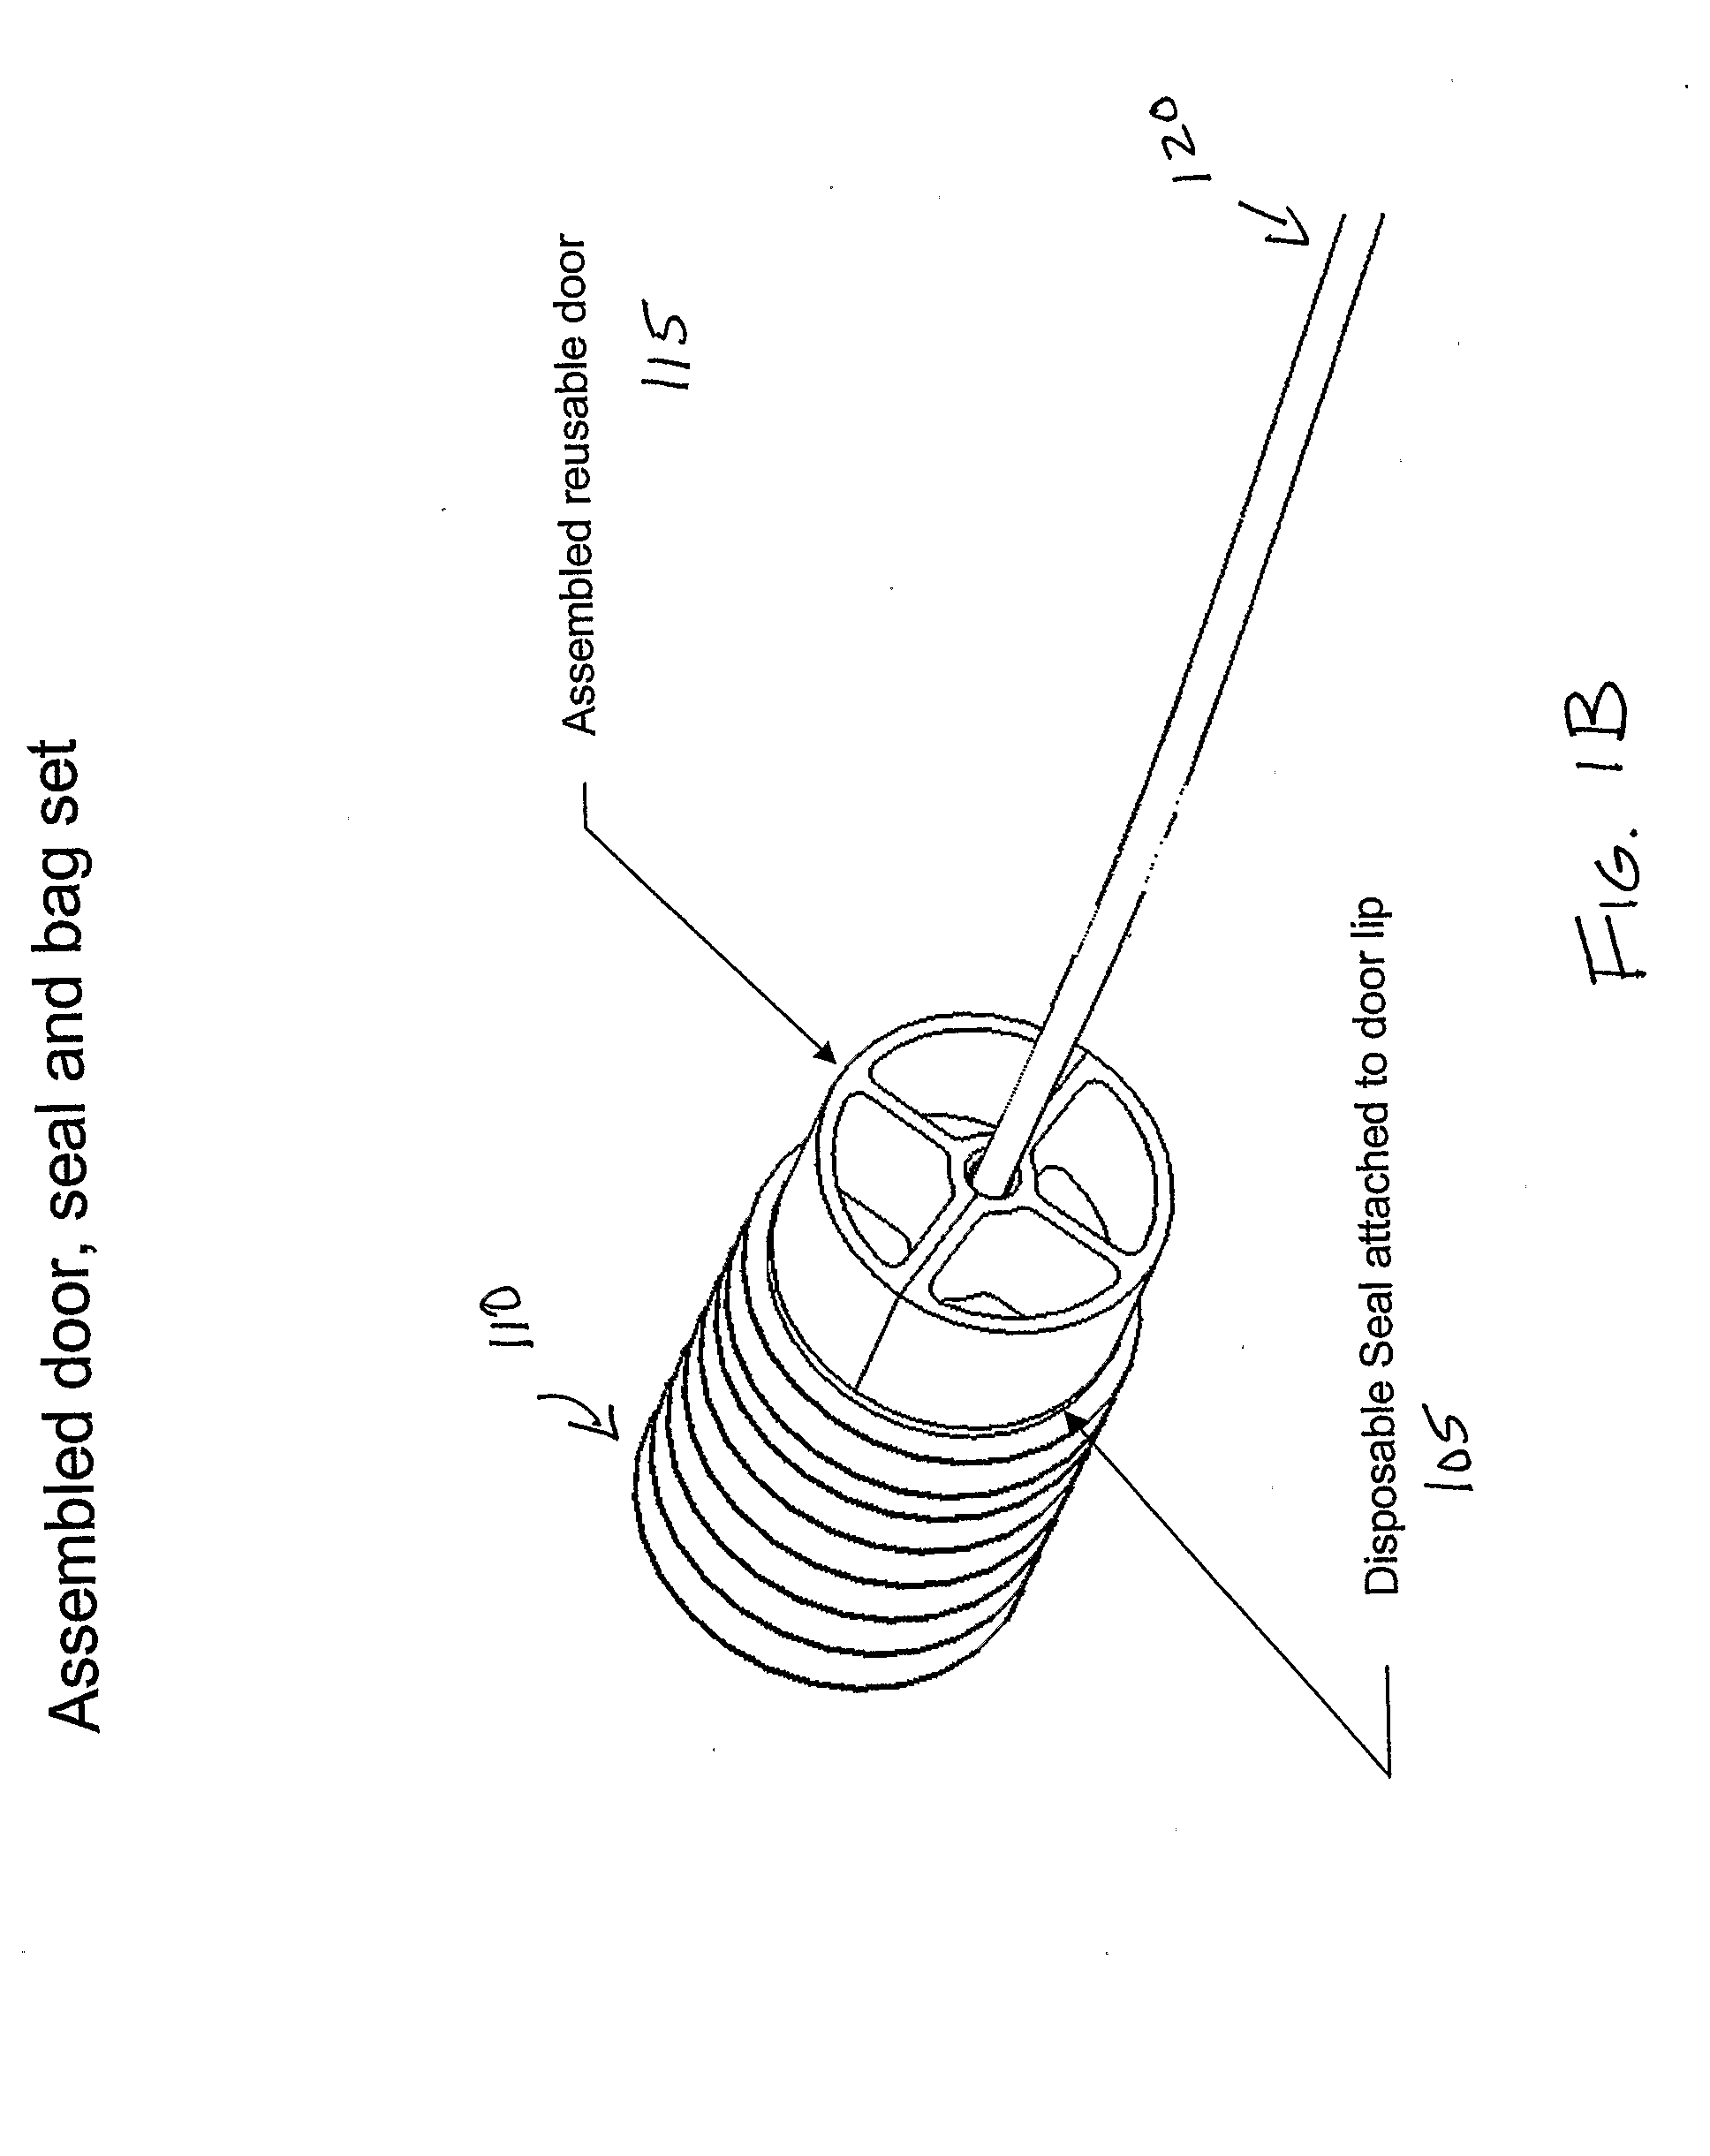 Blood processing device and associated systems and methods